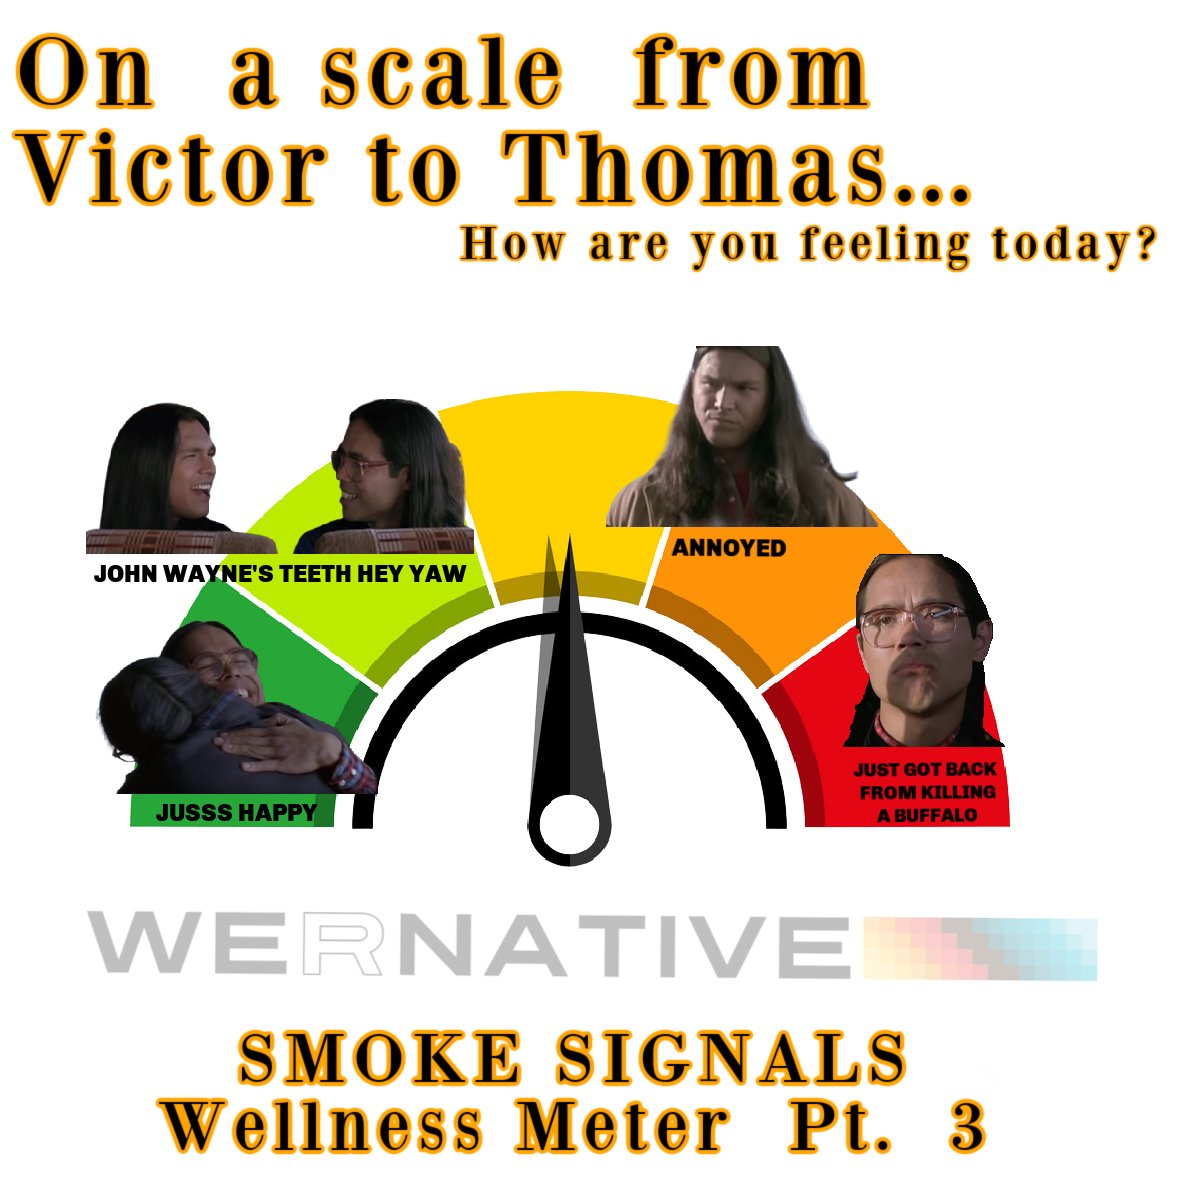 Emotions are high right now, which is ok BUT it’s important to acknowledge these feelings and emotions. So we bring you the Smoke Signals Wellness Meter Pt. 3. How are you feeling today? Reach out to a trusted adult or friend and talk about how you feel and what’s on your mind.